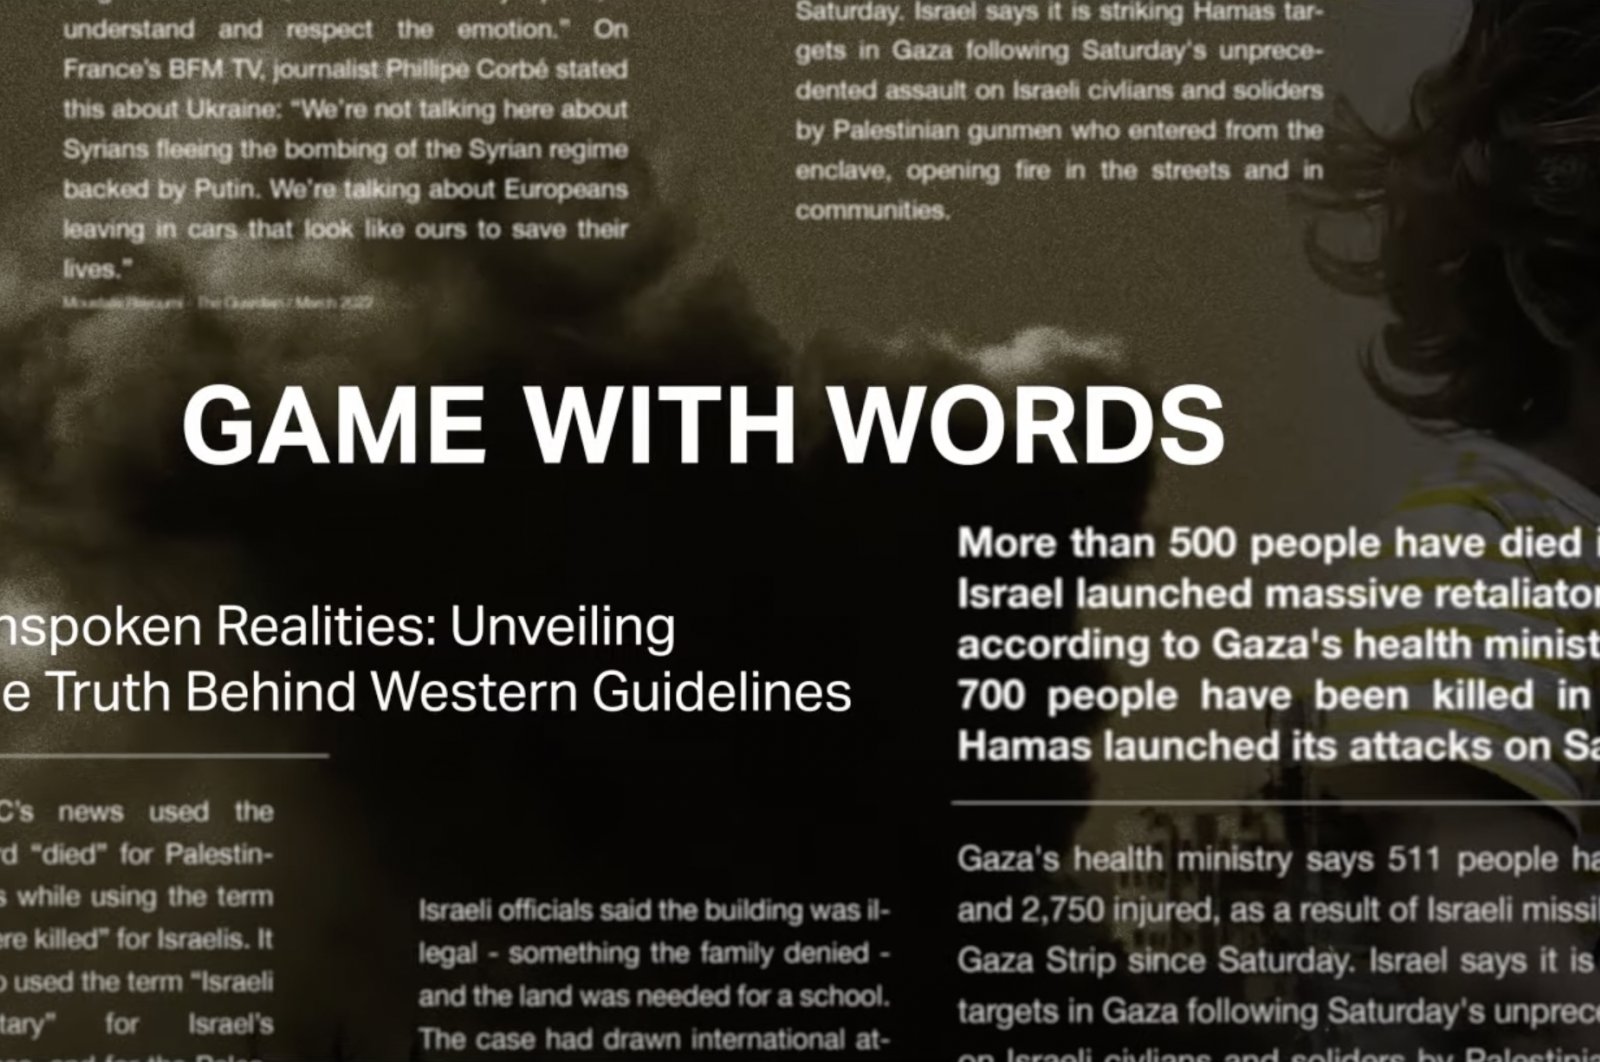 &quot;Game With Words&quot; is the name of the documentary prepared by TRT World.